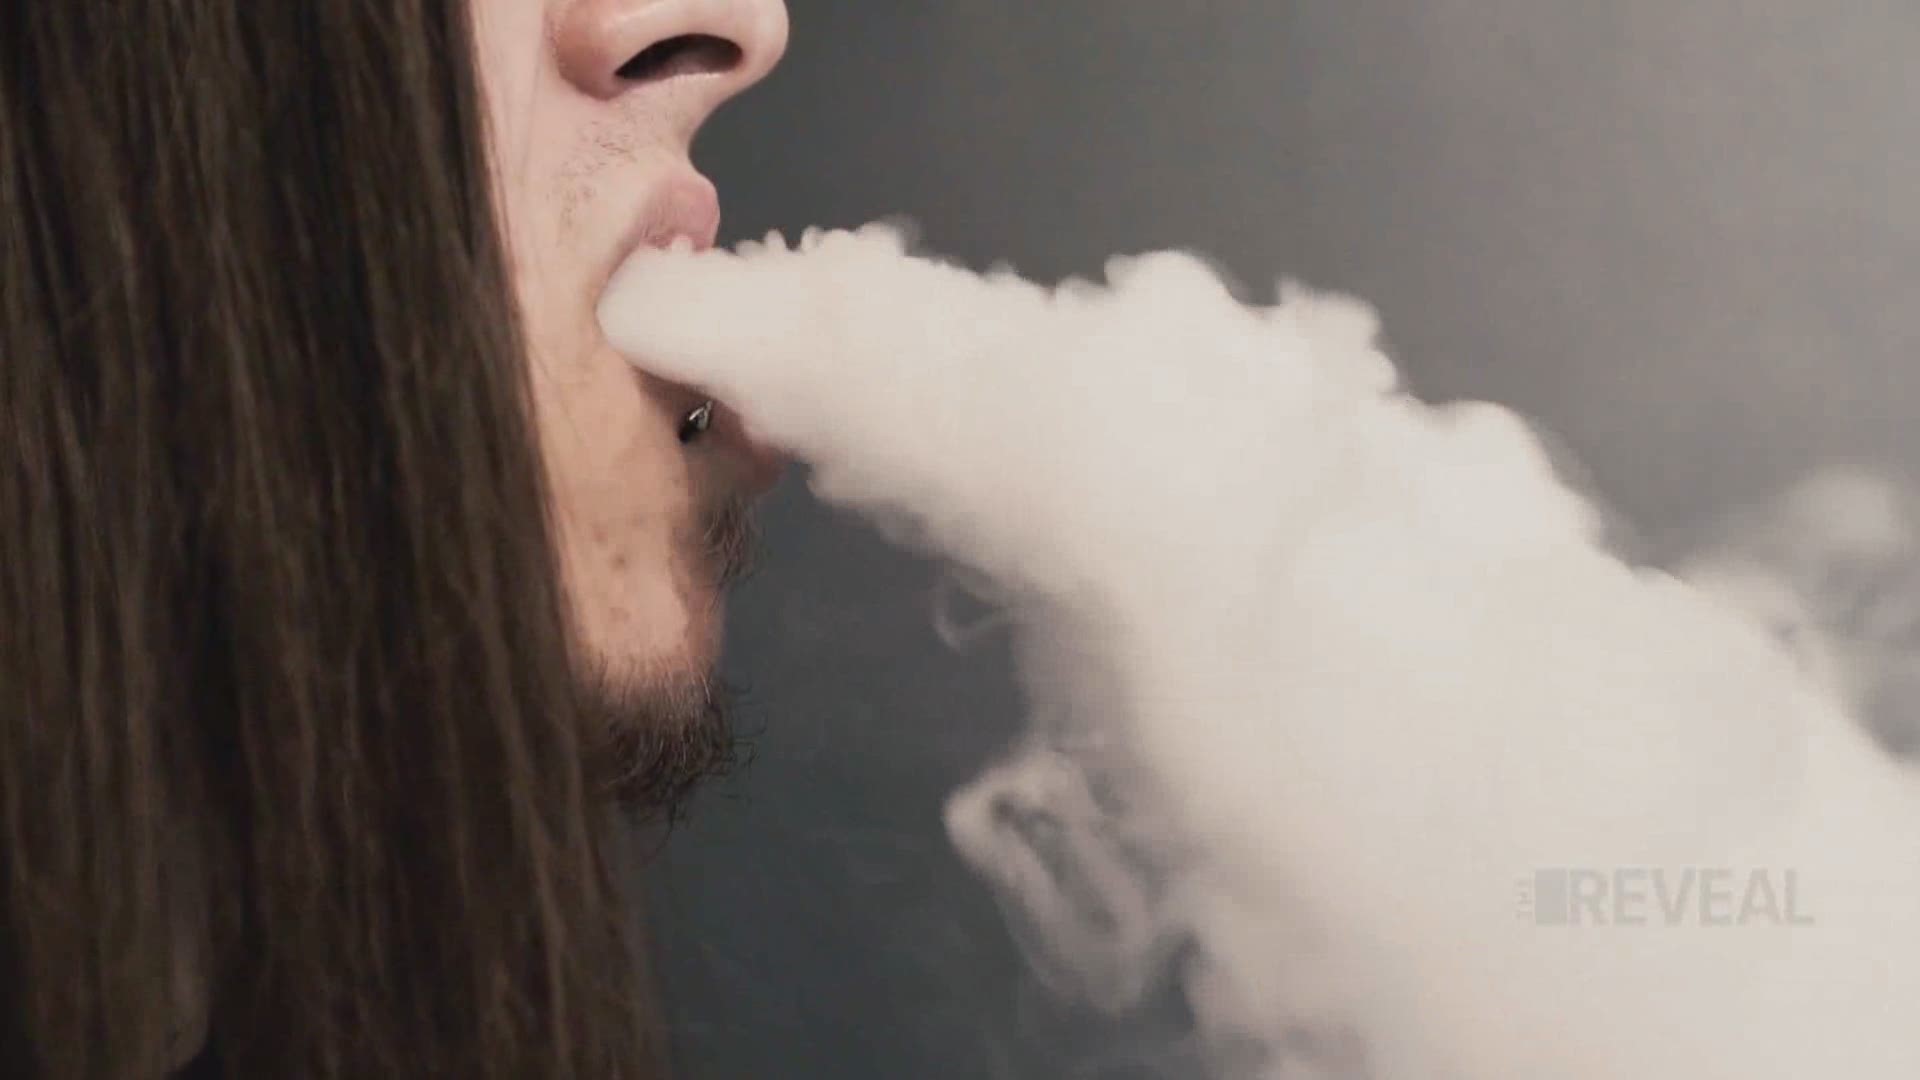 It's illegal to sell vape products to people under the age of 18, but our investigation found that not all stores pay attention.